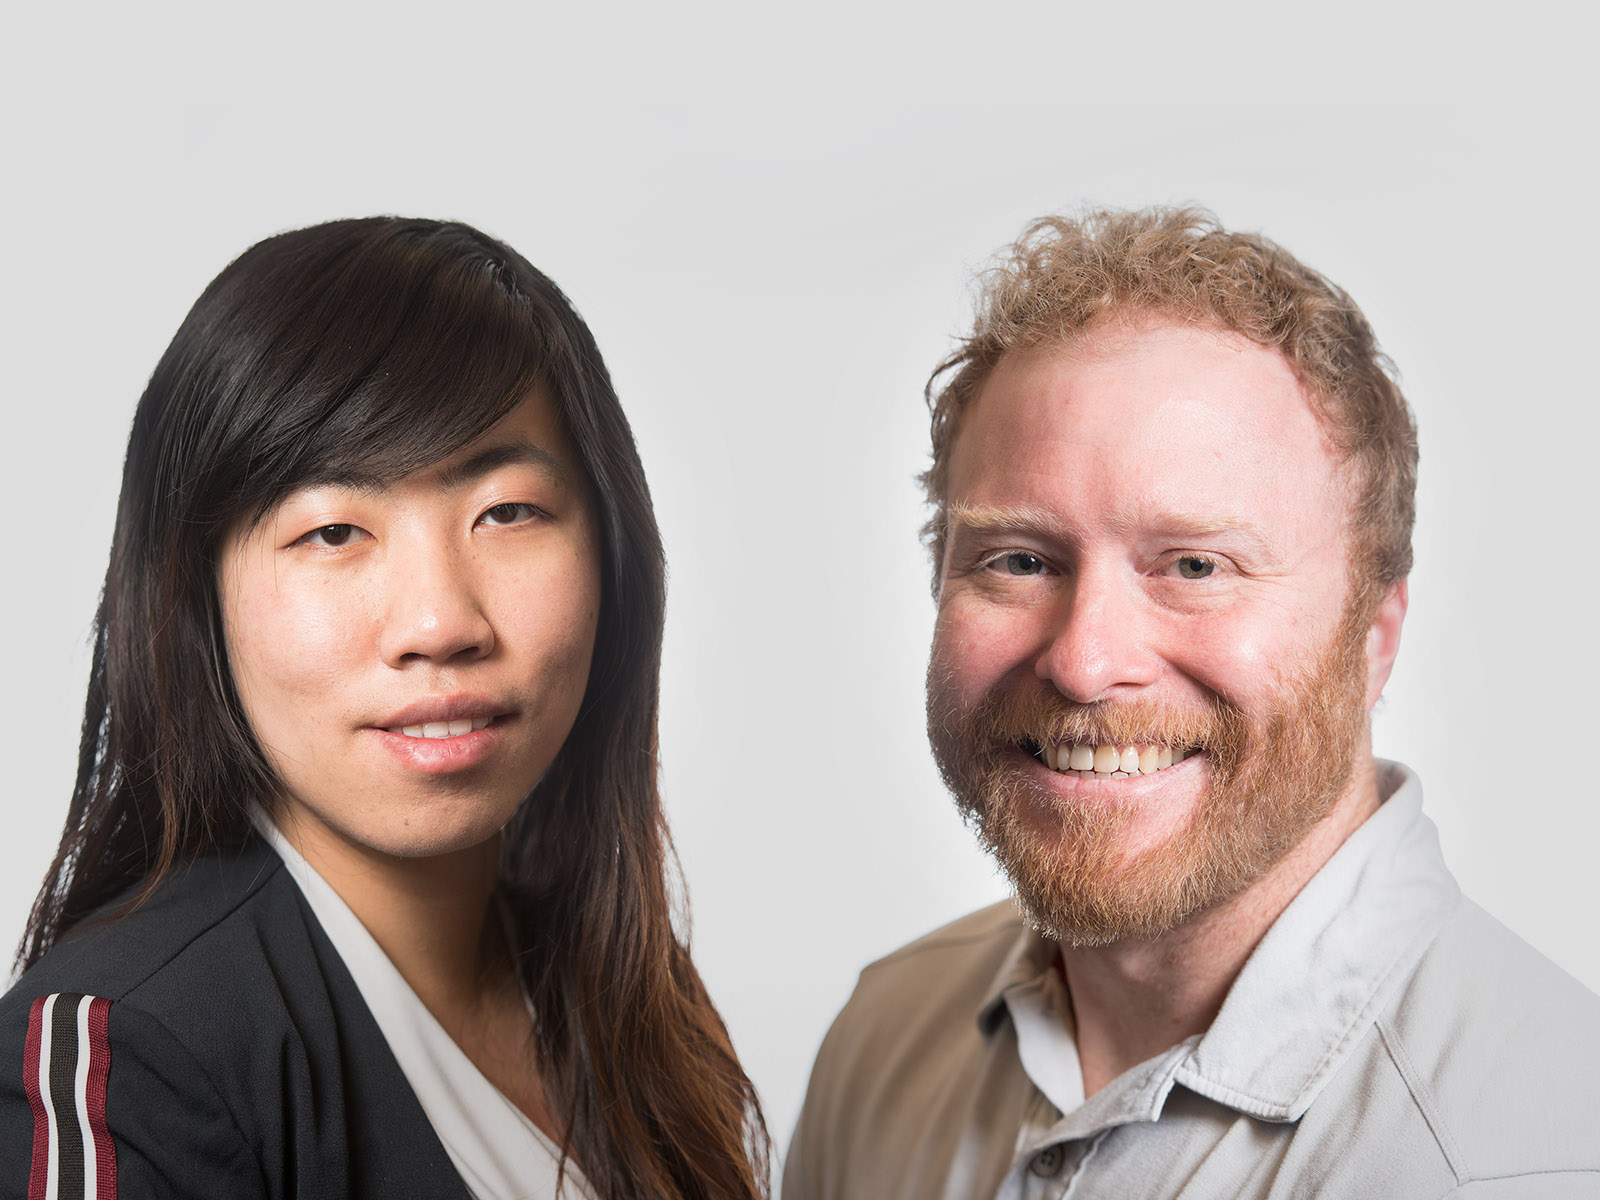 Chemical engineer Yuan Jiang, left, and green chemist David Heldebrant, right, are coauthors on a new study that describes properties of the carbon capture solvent, known as EEMPA, and its potential to remove CO2 from power plant emissions before the acidic gas can reach the atmosphere.